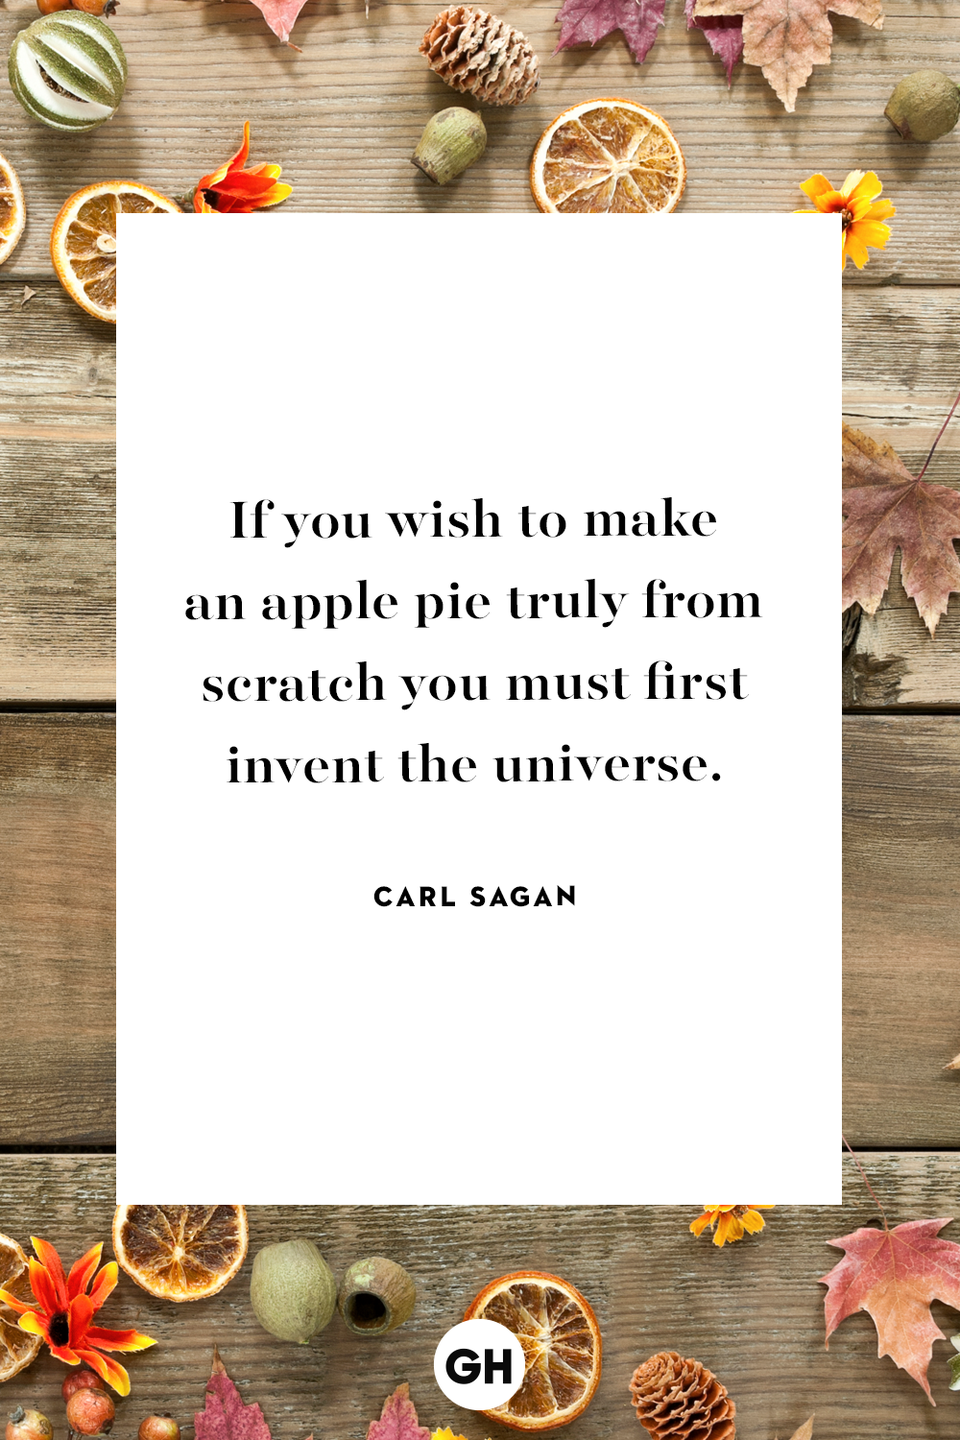 <p>If you wish to make an apple pie truly from scratch you must first invent the universe.</p>